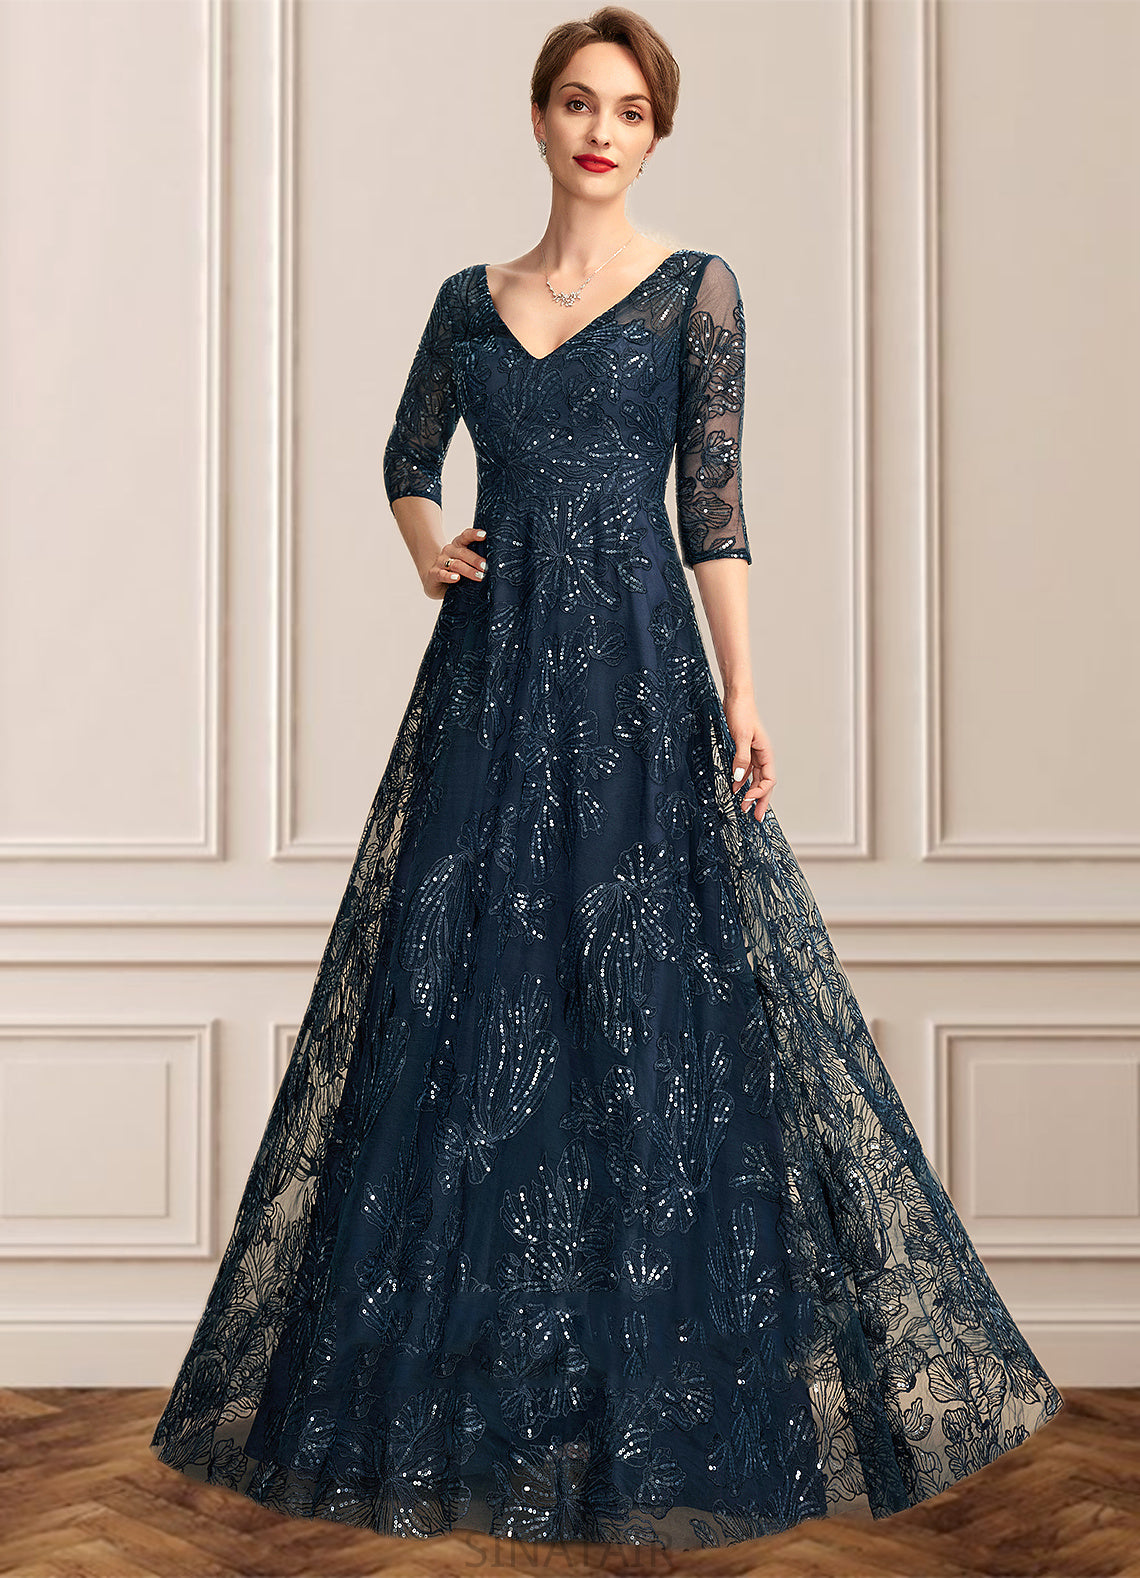 Josephine A-Line V-neck Floor-Length Lace Mother of the Bride Dress With Sequins DH126P0015015